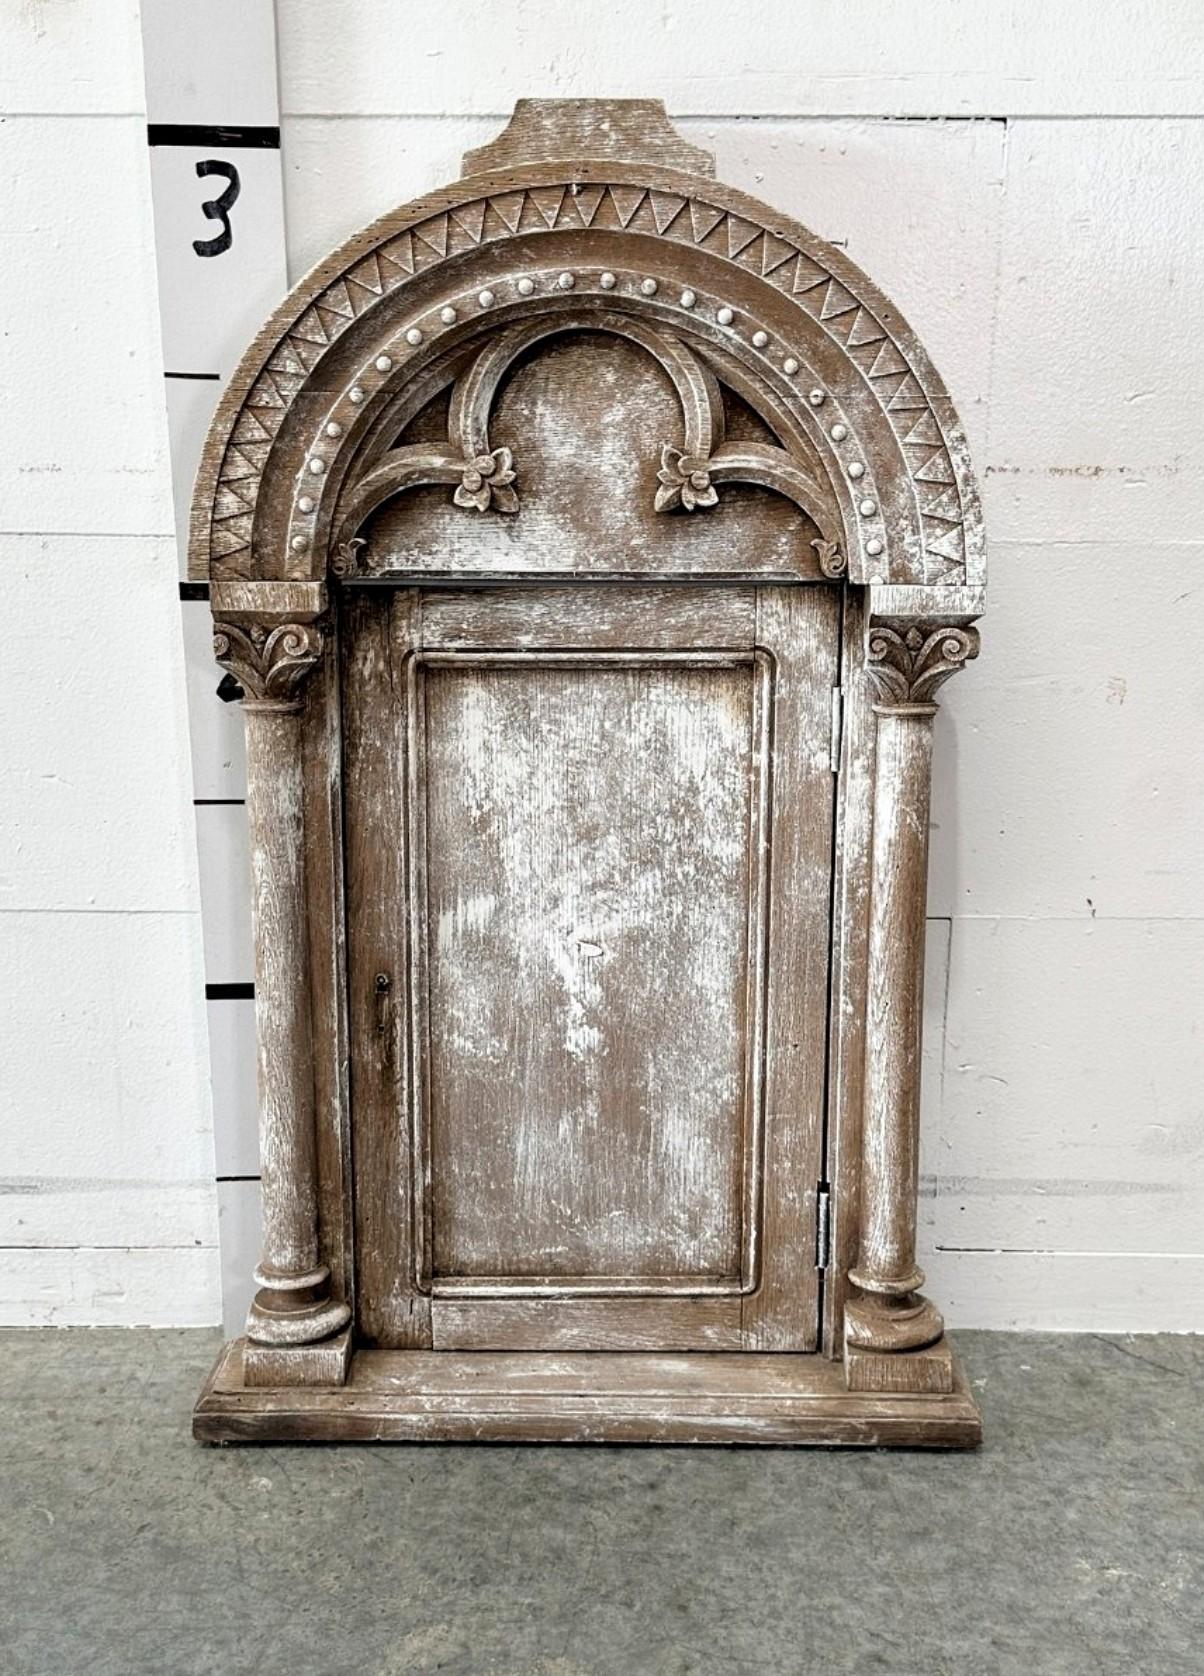 A scarce antique ecclesiastical architectural hand carved and painted wooden church - cathederal tabernacle door. 

18th century or earlier, early Medieval European Romanesque Gothic style, facade with elaborate arched header atop partial quartfoil,